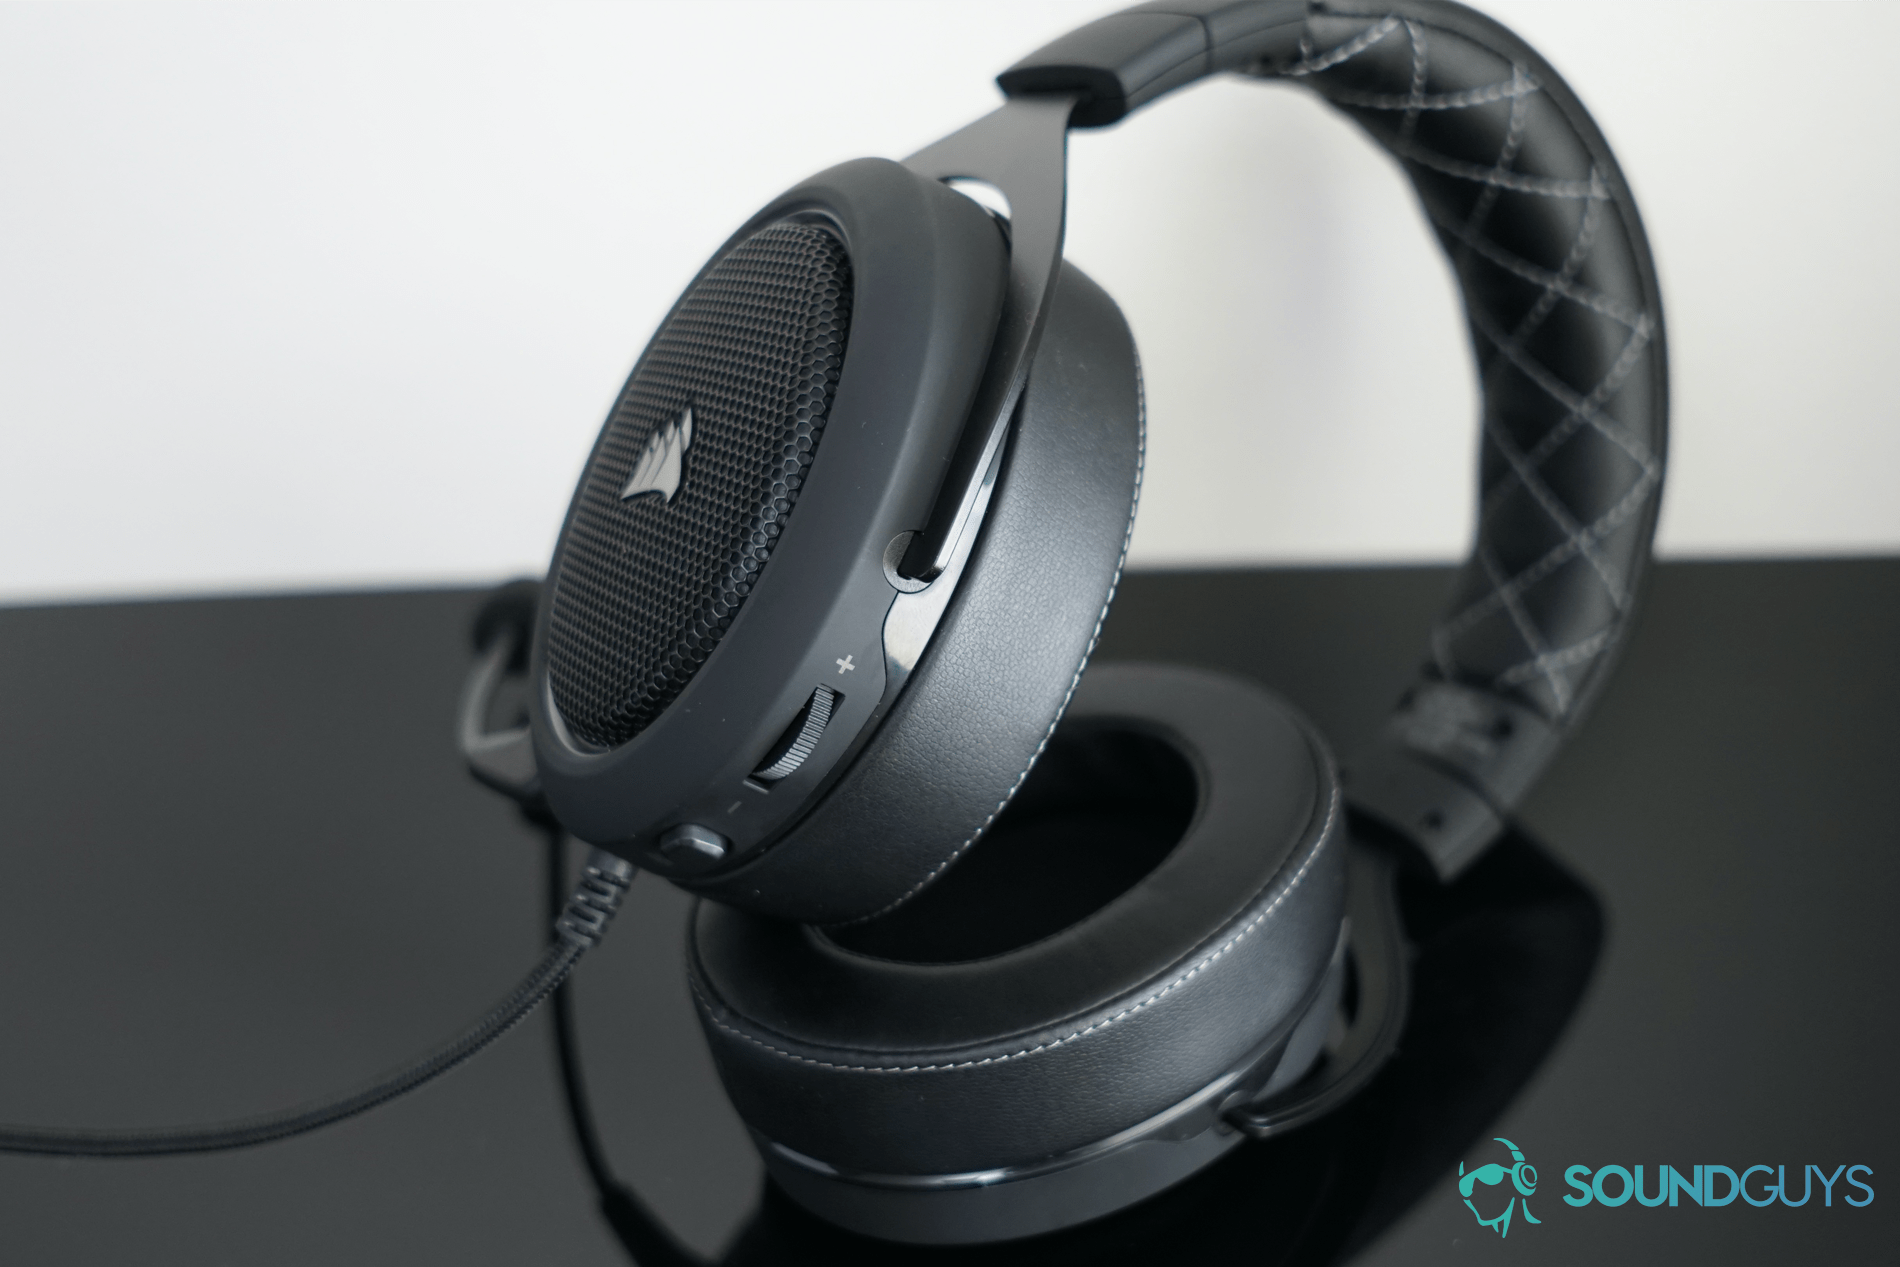 The corsair hs60 pro surround lies on its side with the on ear controls in view